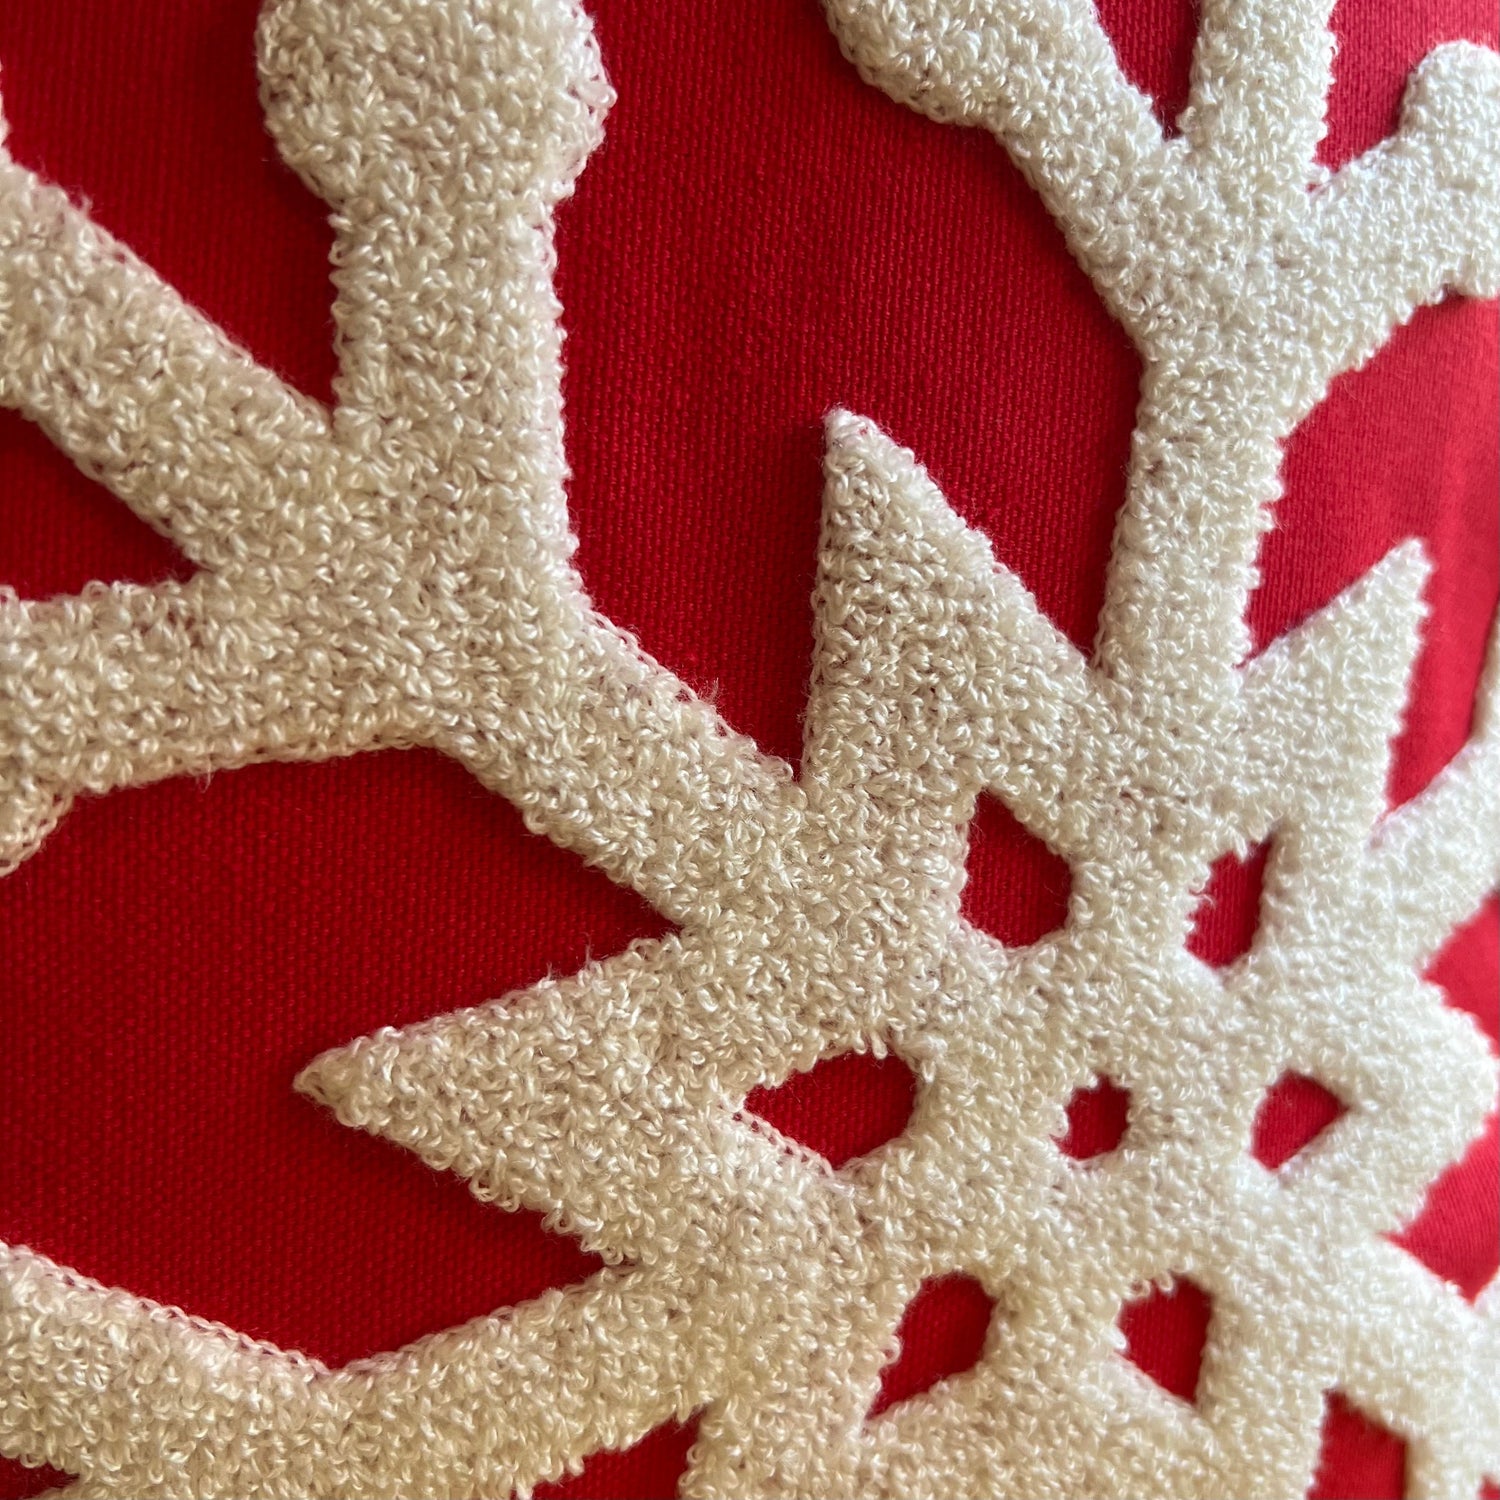 Red Snowflake Embroidered Pillow Cover